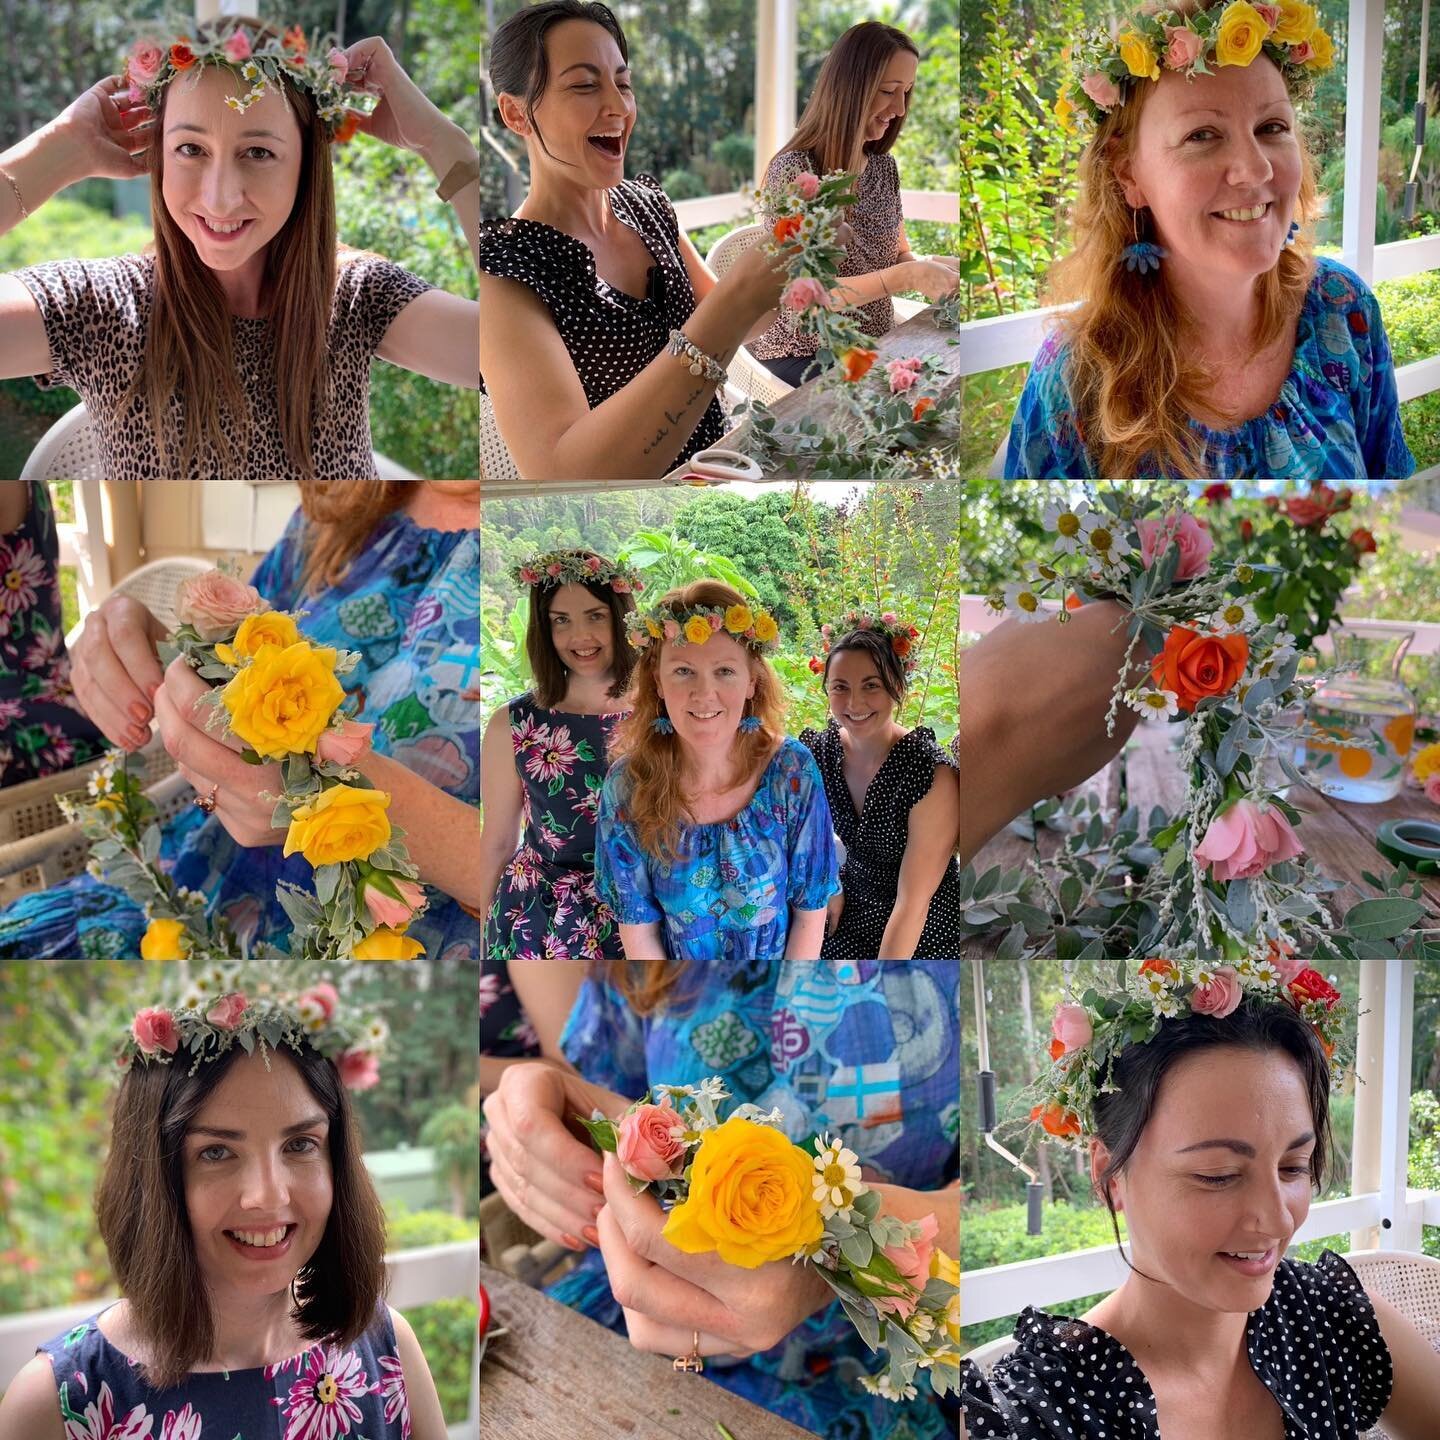 Some pics of a lovely  #hens #flowercrown workshop with @rainbow_7.5. Thanks girls! 🌸 Flower crown workshops are such a fun way to relax and have fun with friends. They bring a special focus to birthdays, baby showers and hens parties. Contact me fo